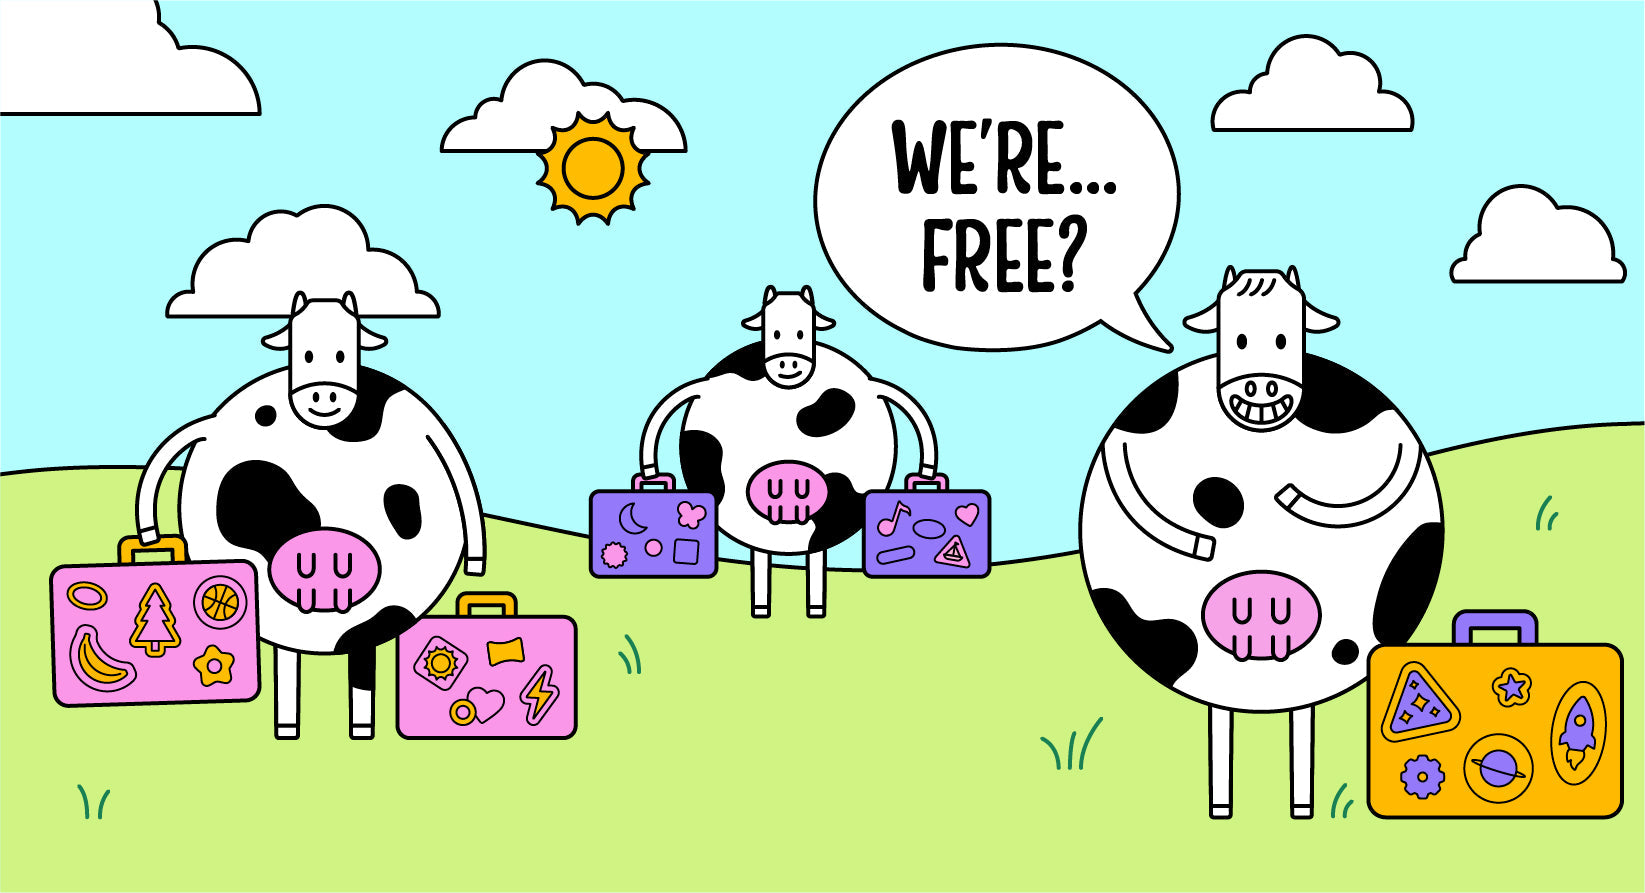 "It is a beautiful, sunny, day. Three cows are standing in a field with big smiles. They have  suitcases that are  brightly colored and covered in stickers with trees, musical notes, spaceships, and flowers. One cow exclaims, 'We're...free?' "